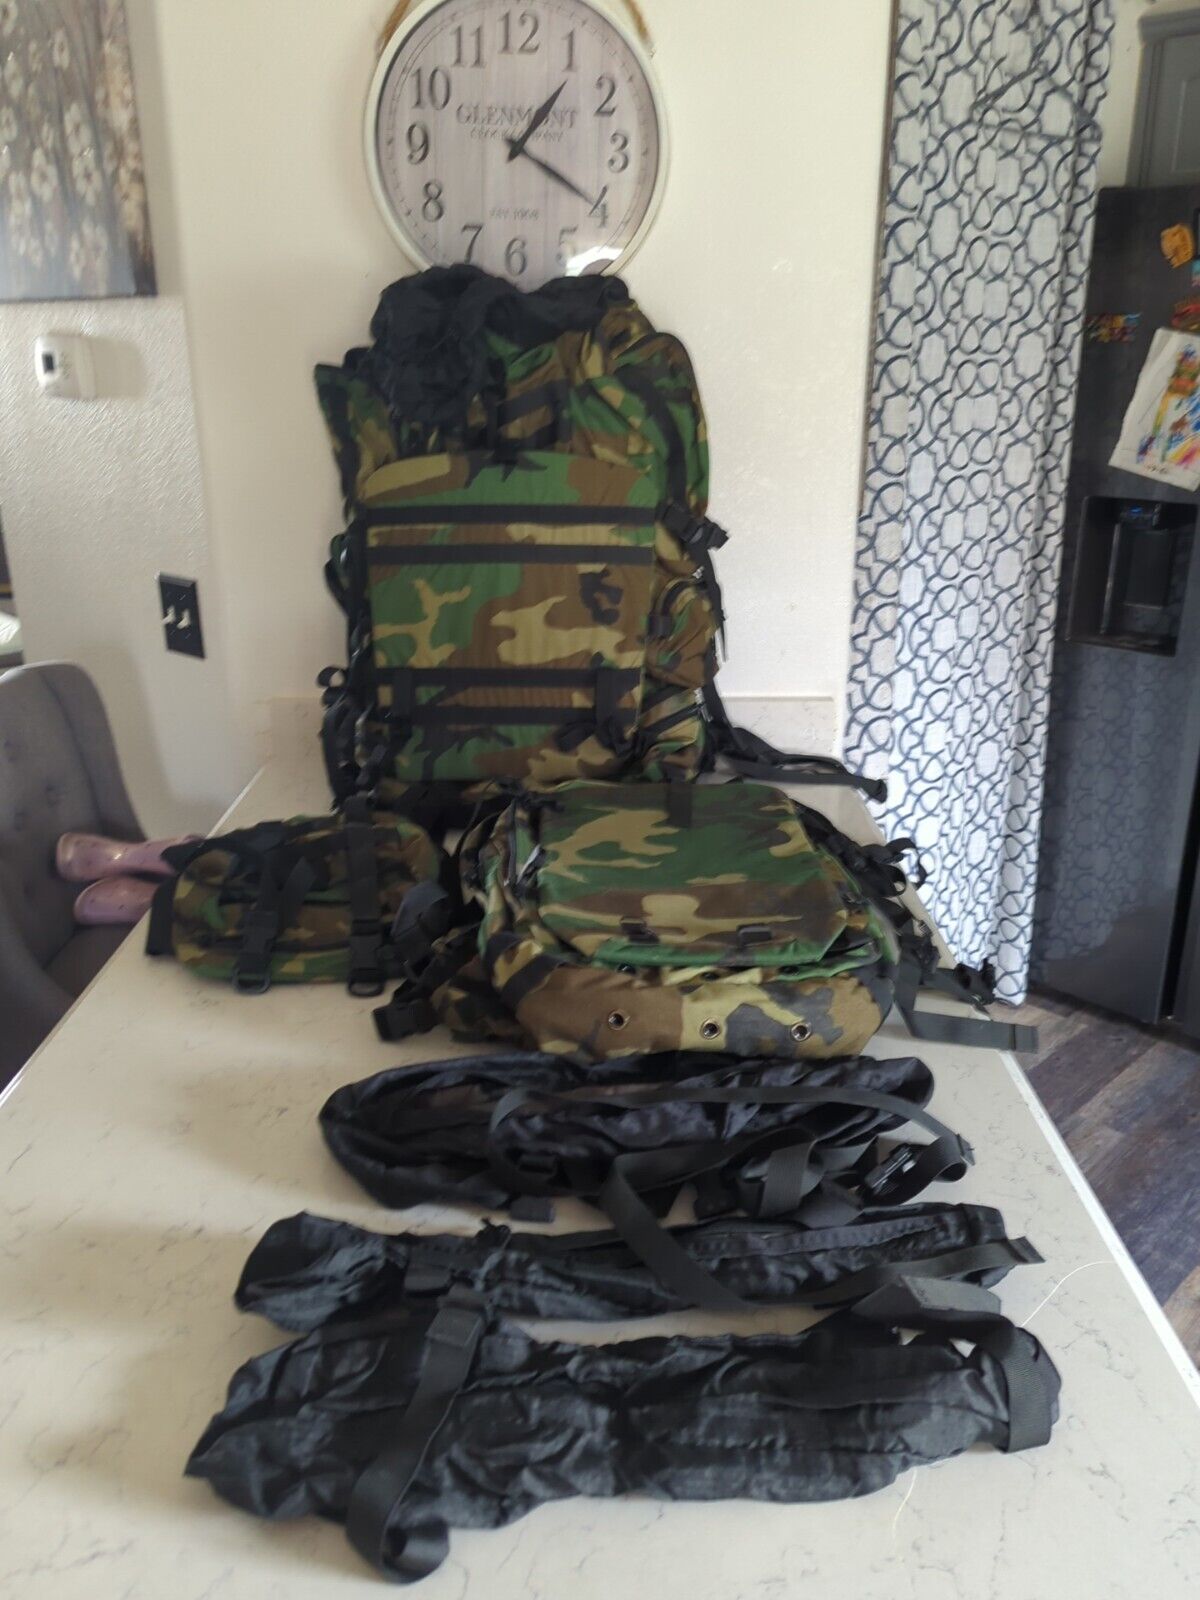 Gregory UM21 SPEAR Military Main And Assault Pack, Butt Pack, Compression Bags